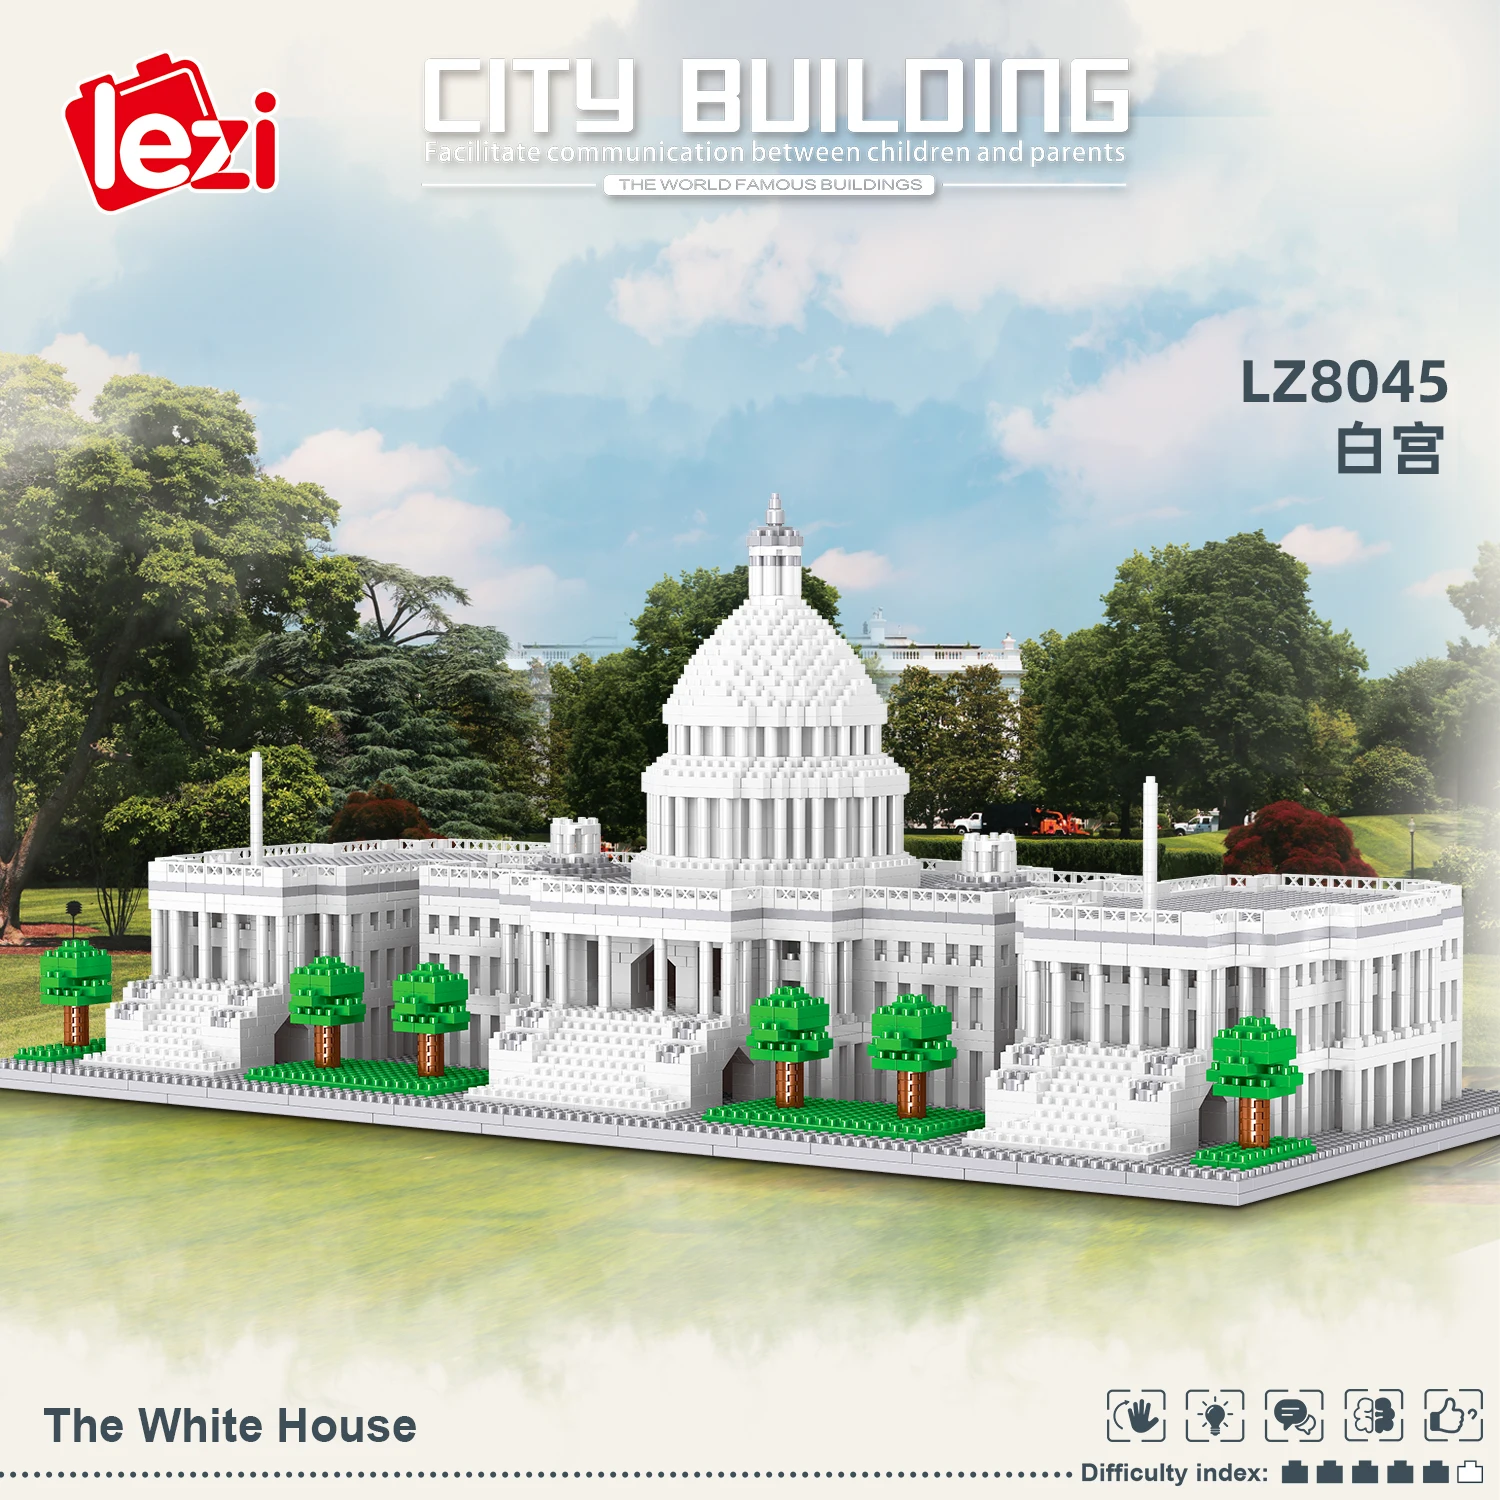 

White House Architecture Building Set Model Kit STEAM Construction Toy Gift for Kids and Adults (3796 PCS)